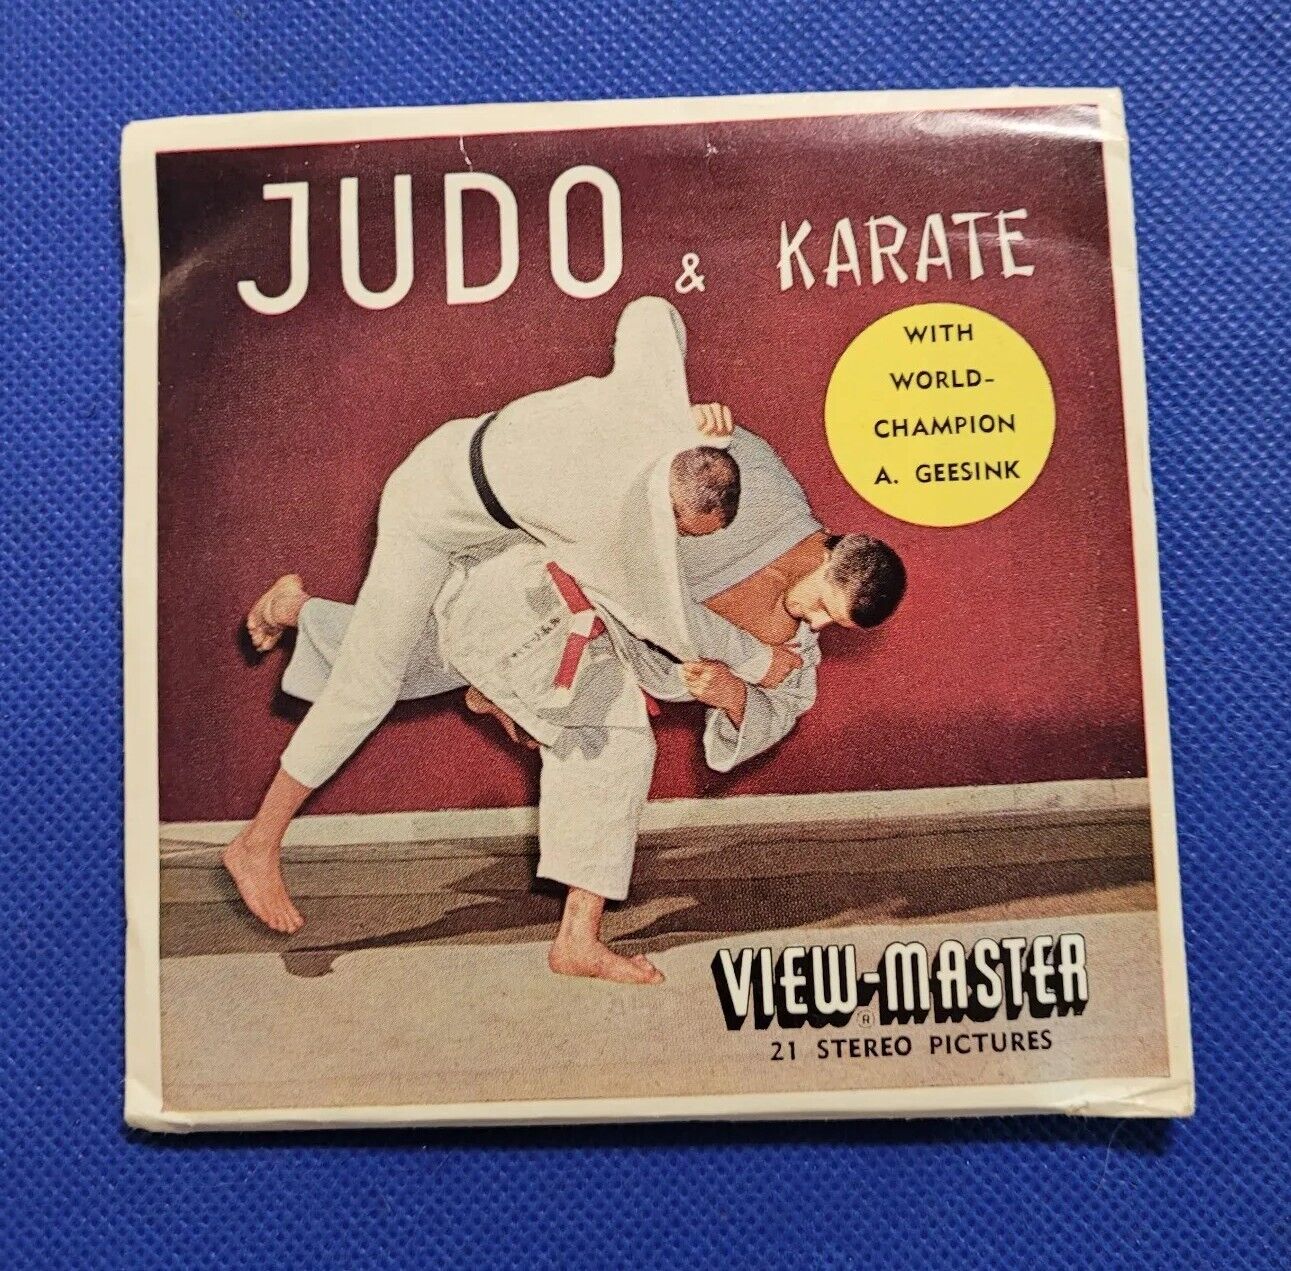 Scarce Sawyer's B670 Judo & Karate with A. Geesink view-master 3 reels packet